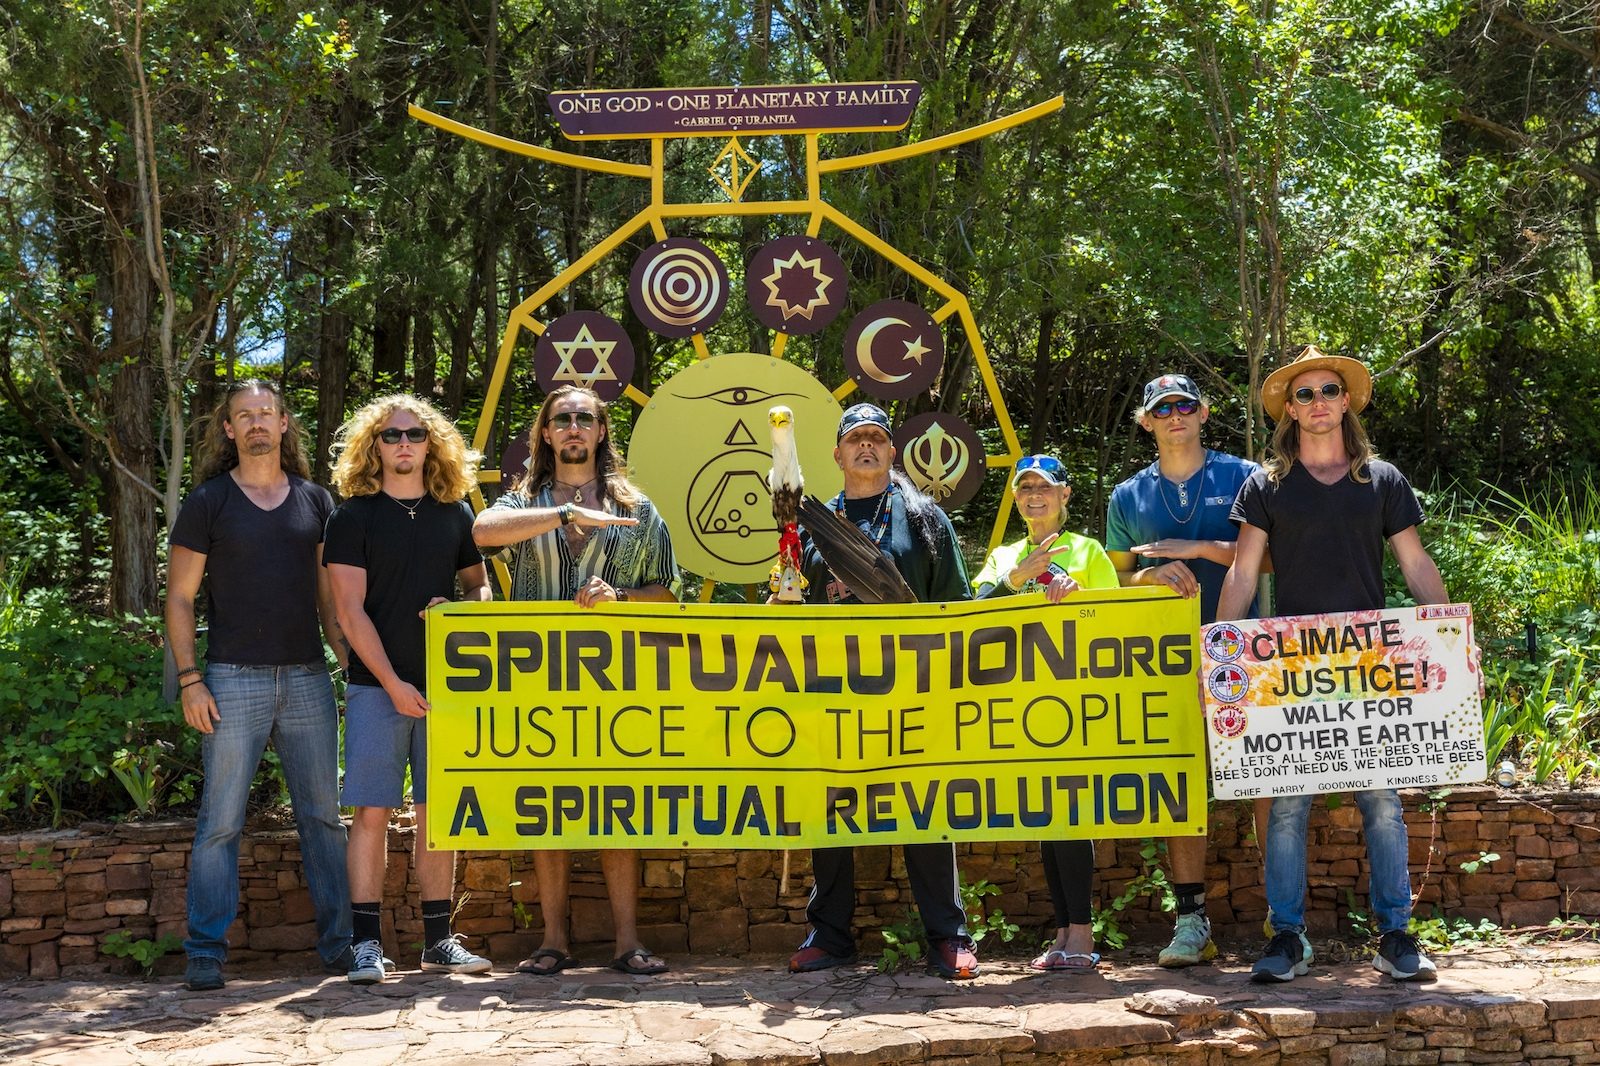 Camp Avalon Spiritual Nature Retreat Bulletin - We were blessed to join and support Chief Harry Good Wolf Kindness in Sedona this summer while on his national 